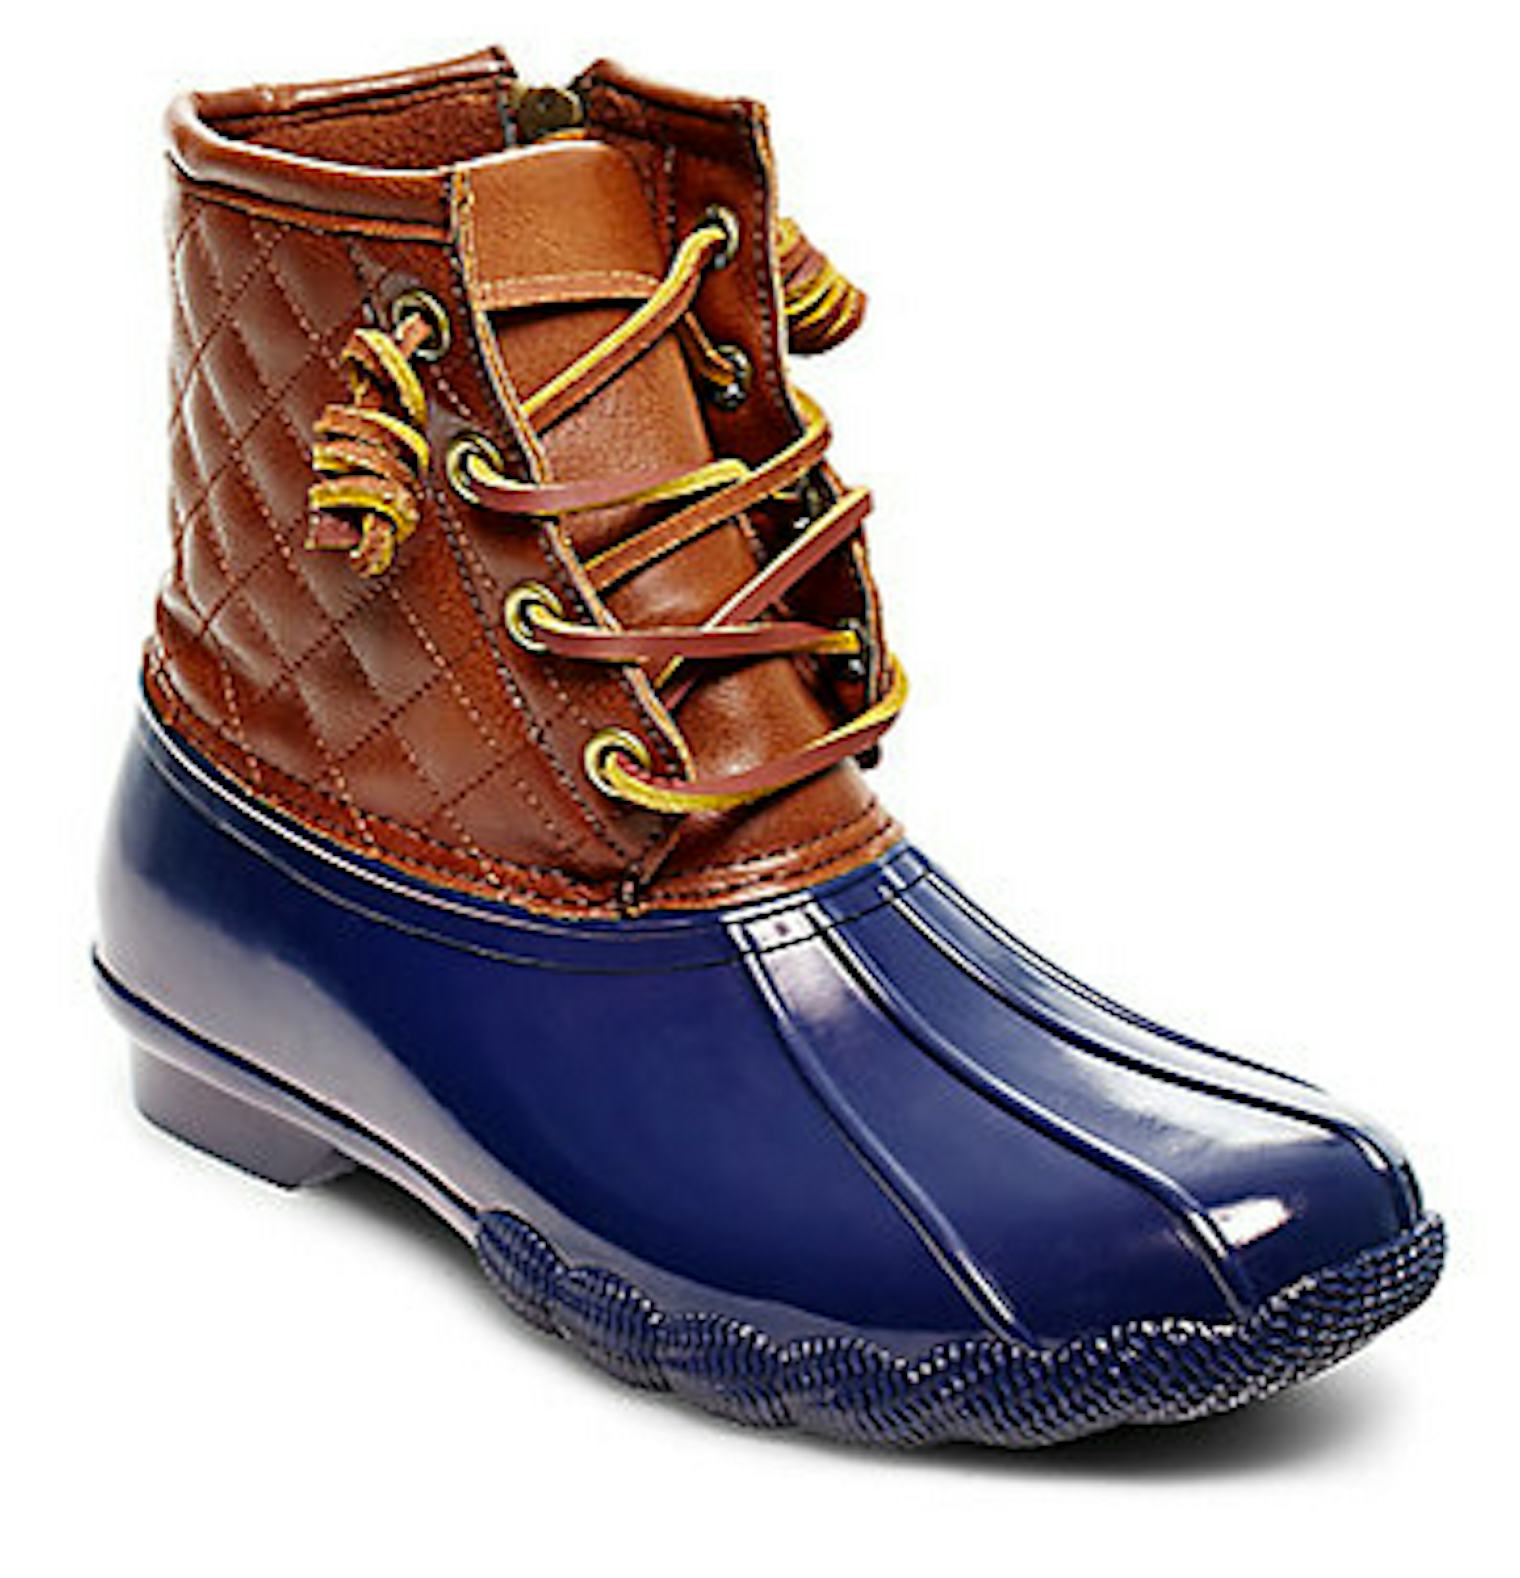 7 L.L. Bean Duck Boot Look-A-Likes To Buy Now That That The Originals ...